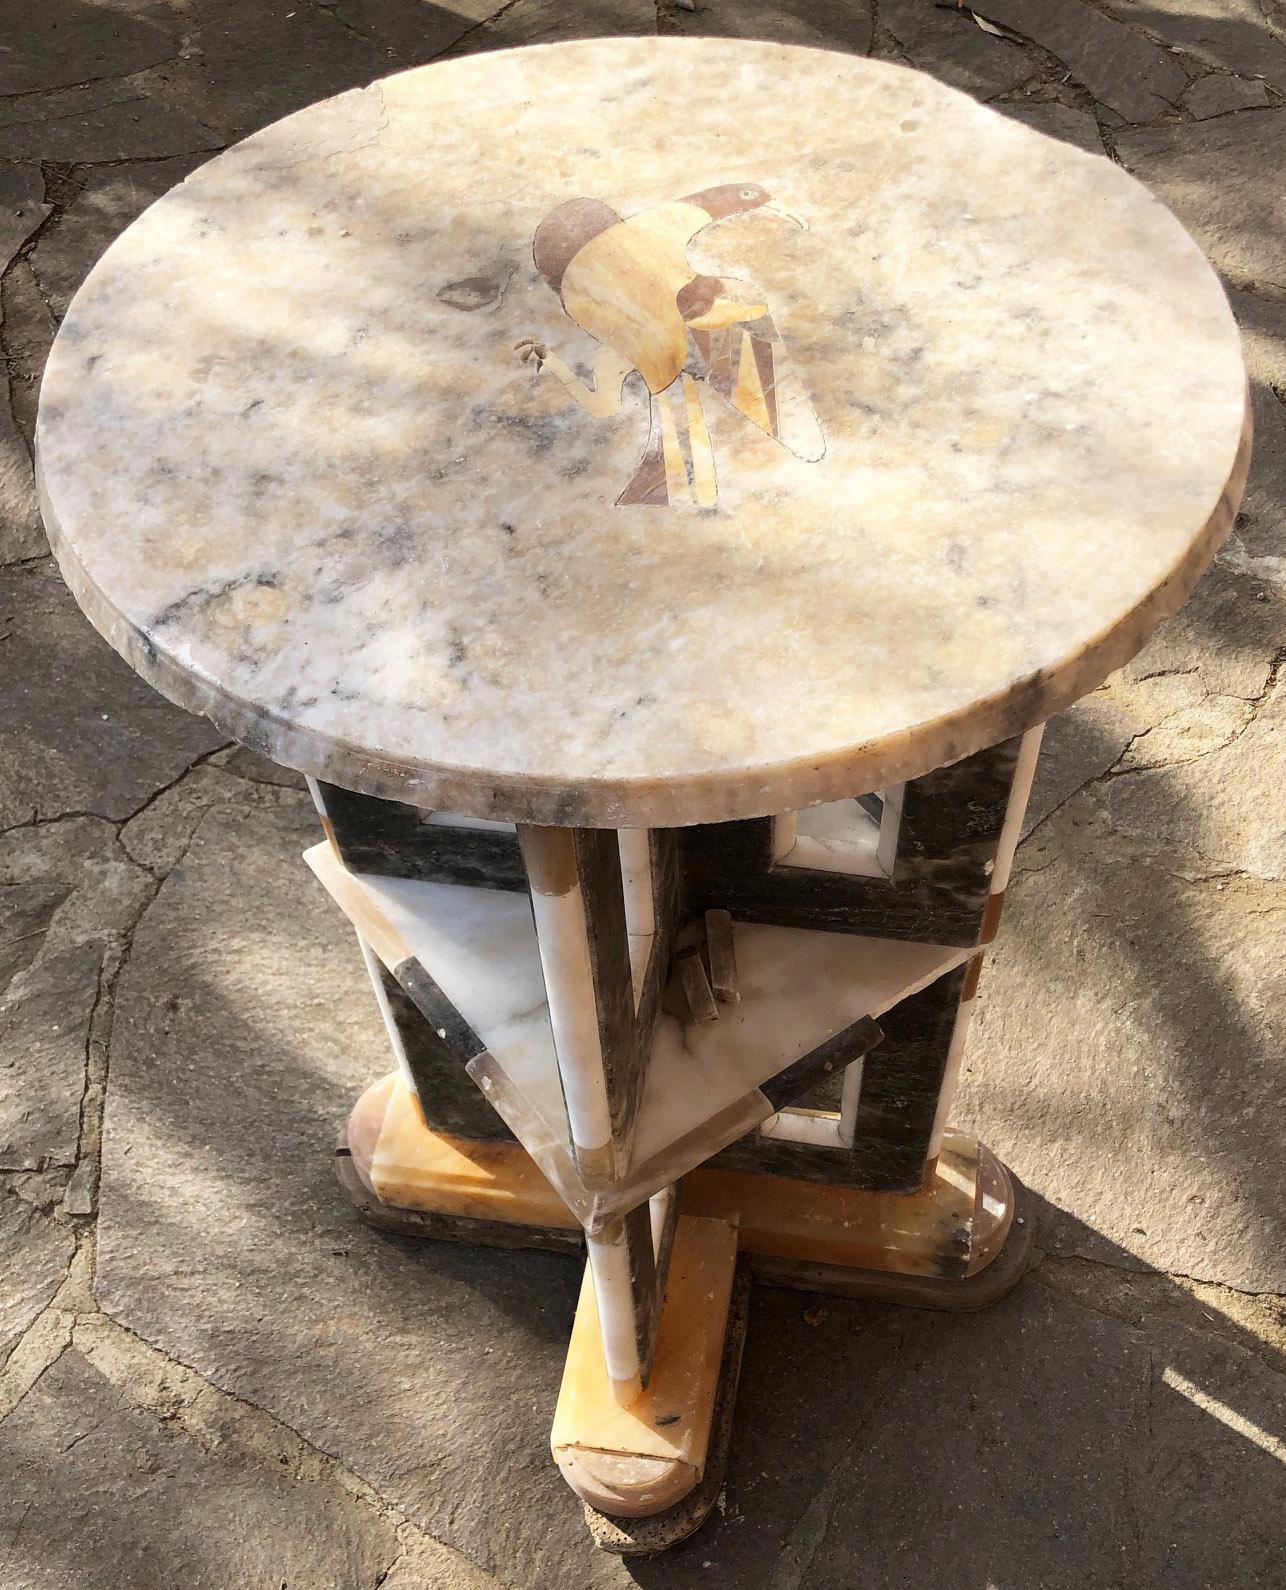 Antique original  marble table made of three blocks, with a bird motif inlaid on the top.
Parts in alabaster and small pieces of marble of various types are missing, the table is to be restored.
Size (cm.): Diameter 47cm, height 75cm
Rarity, due to